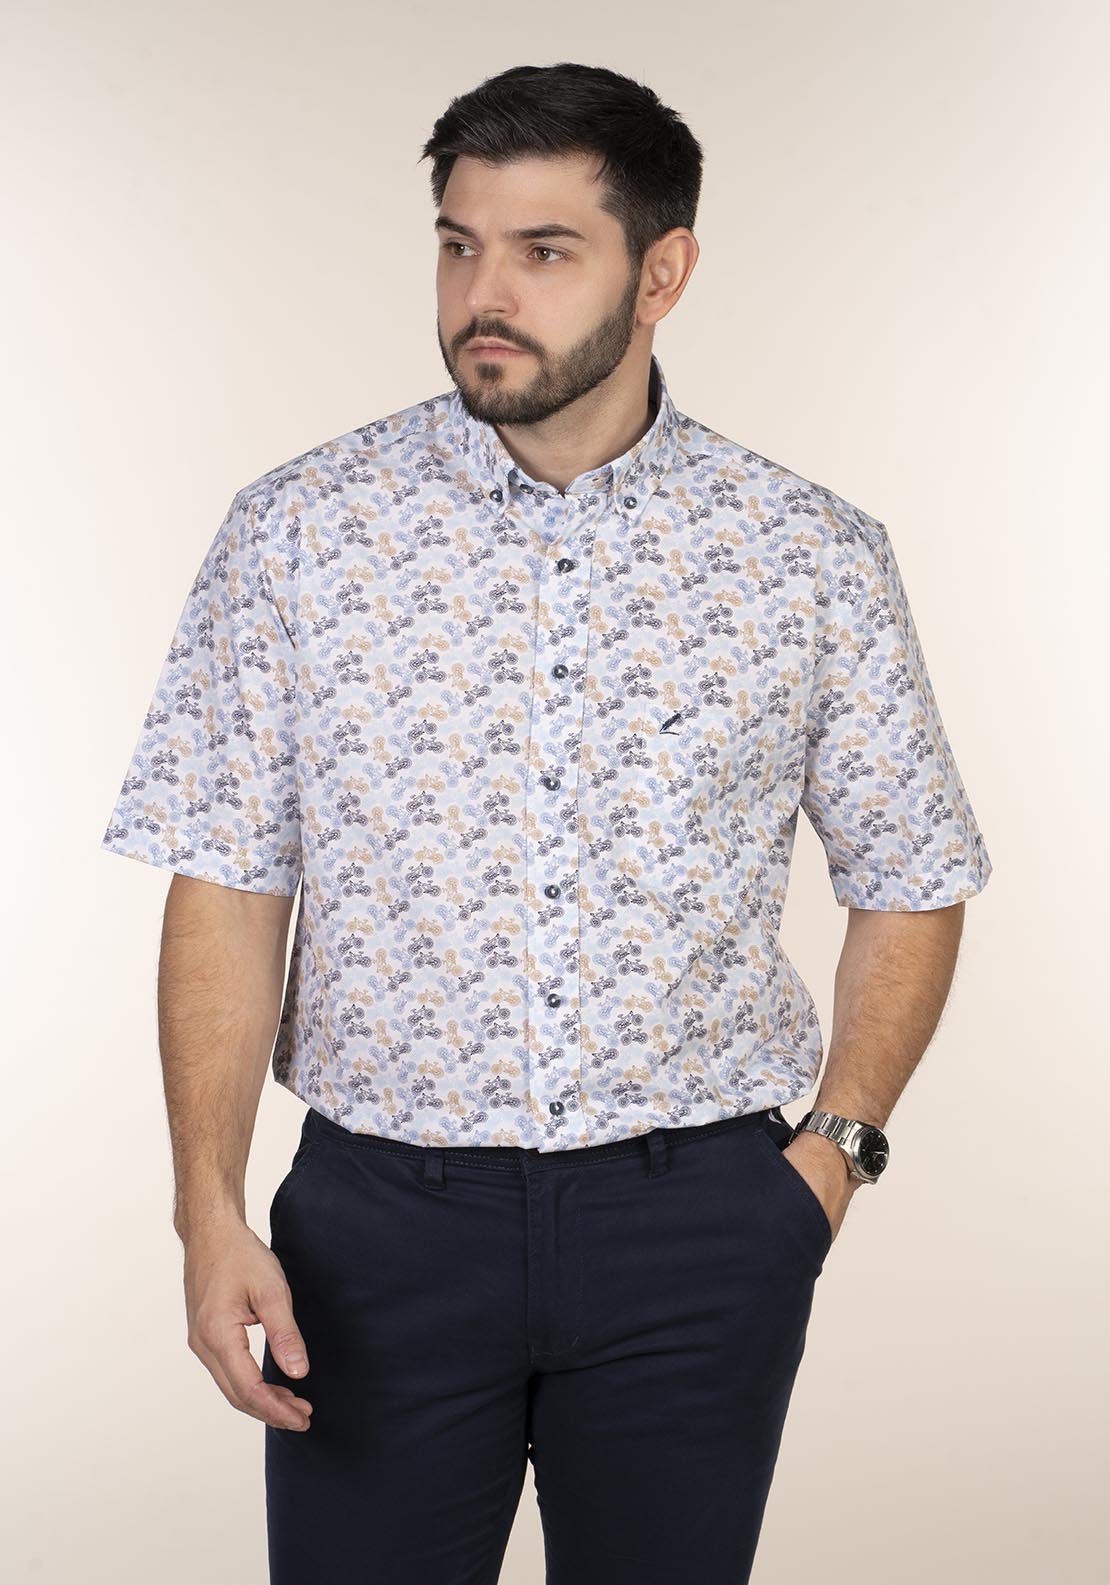 Yeats Casual Patterned Short Sleeve Shirt 3 Shaws Department Stores